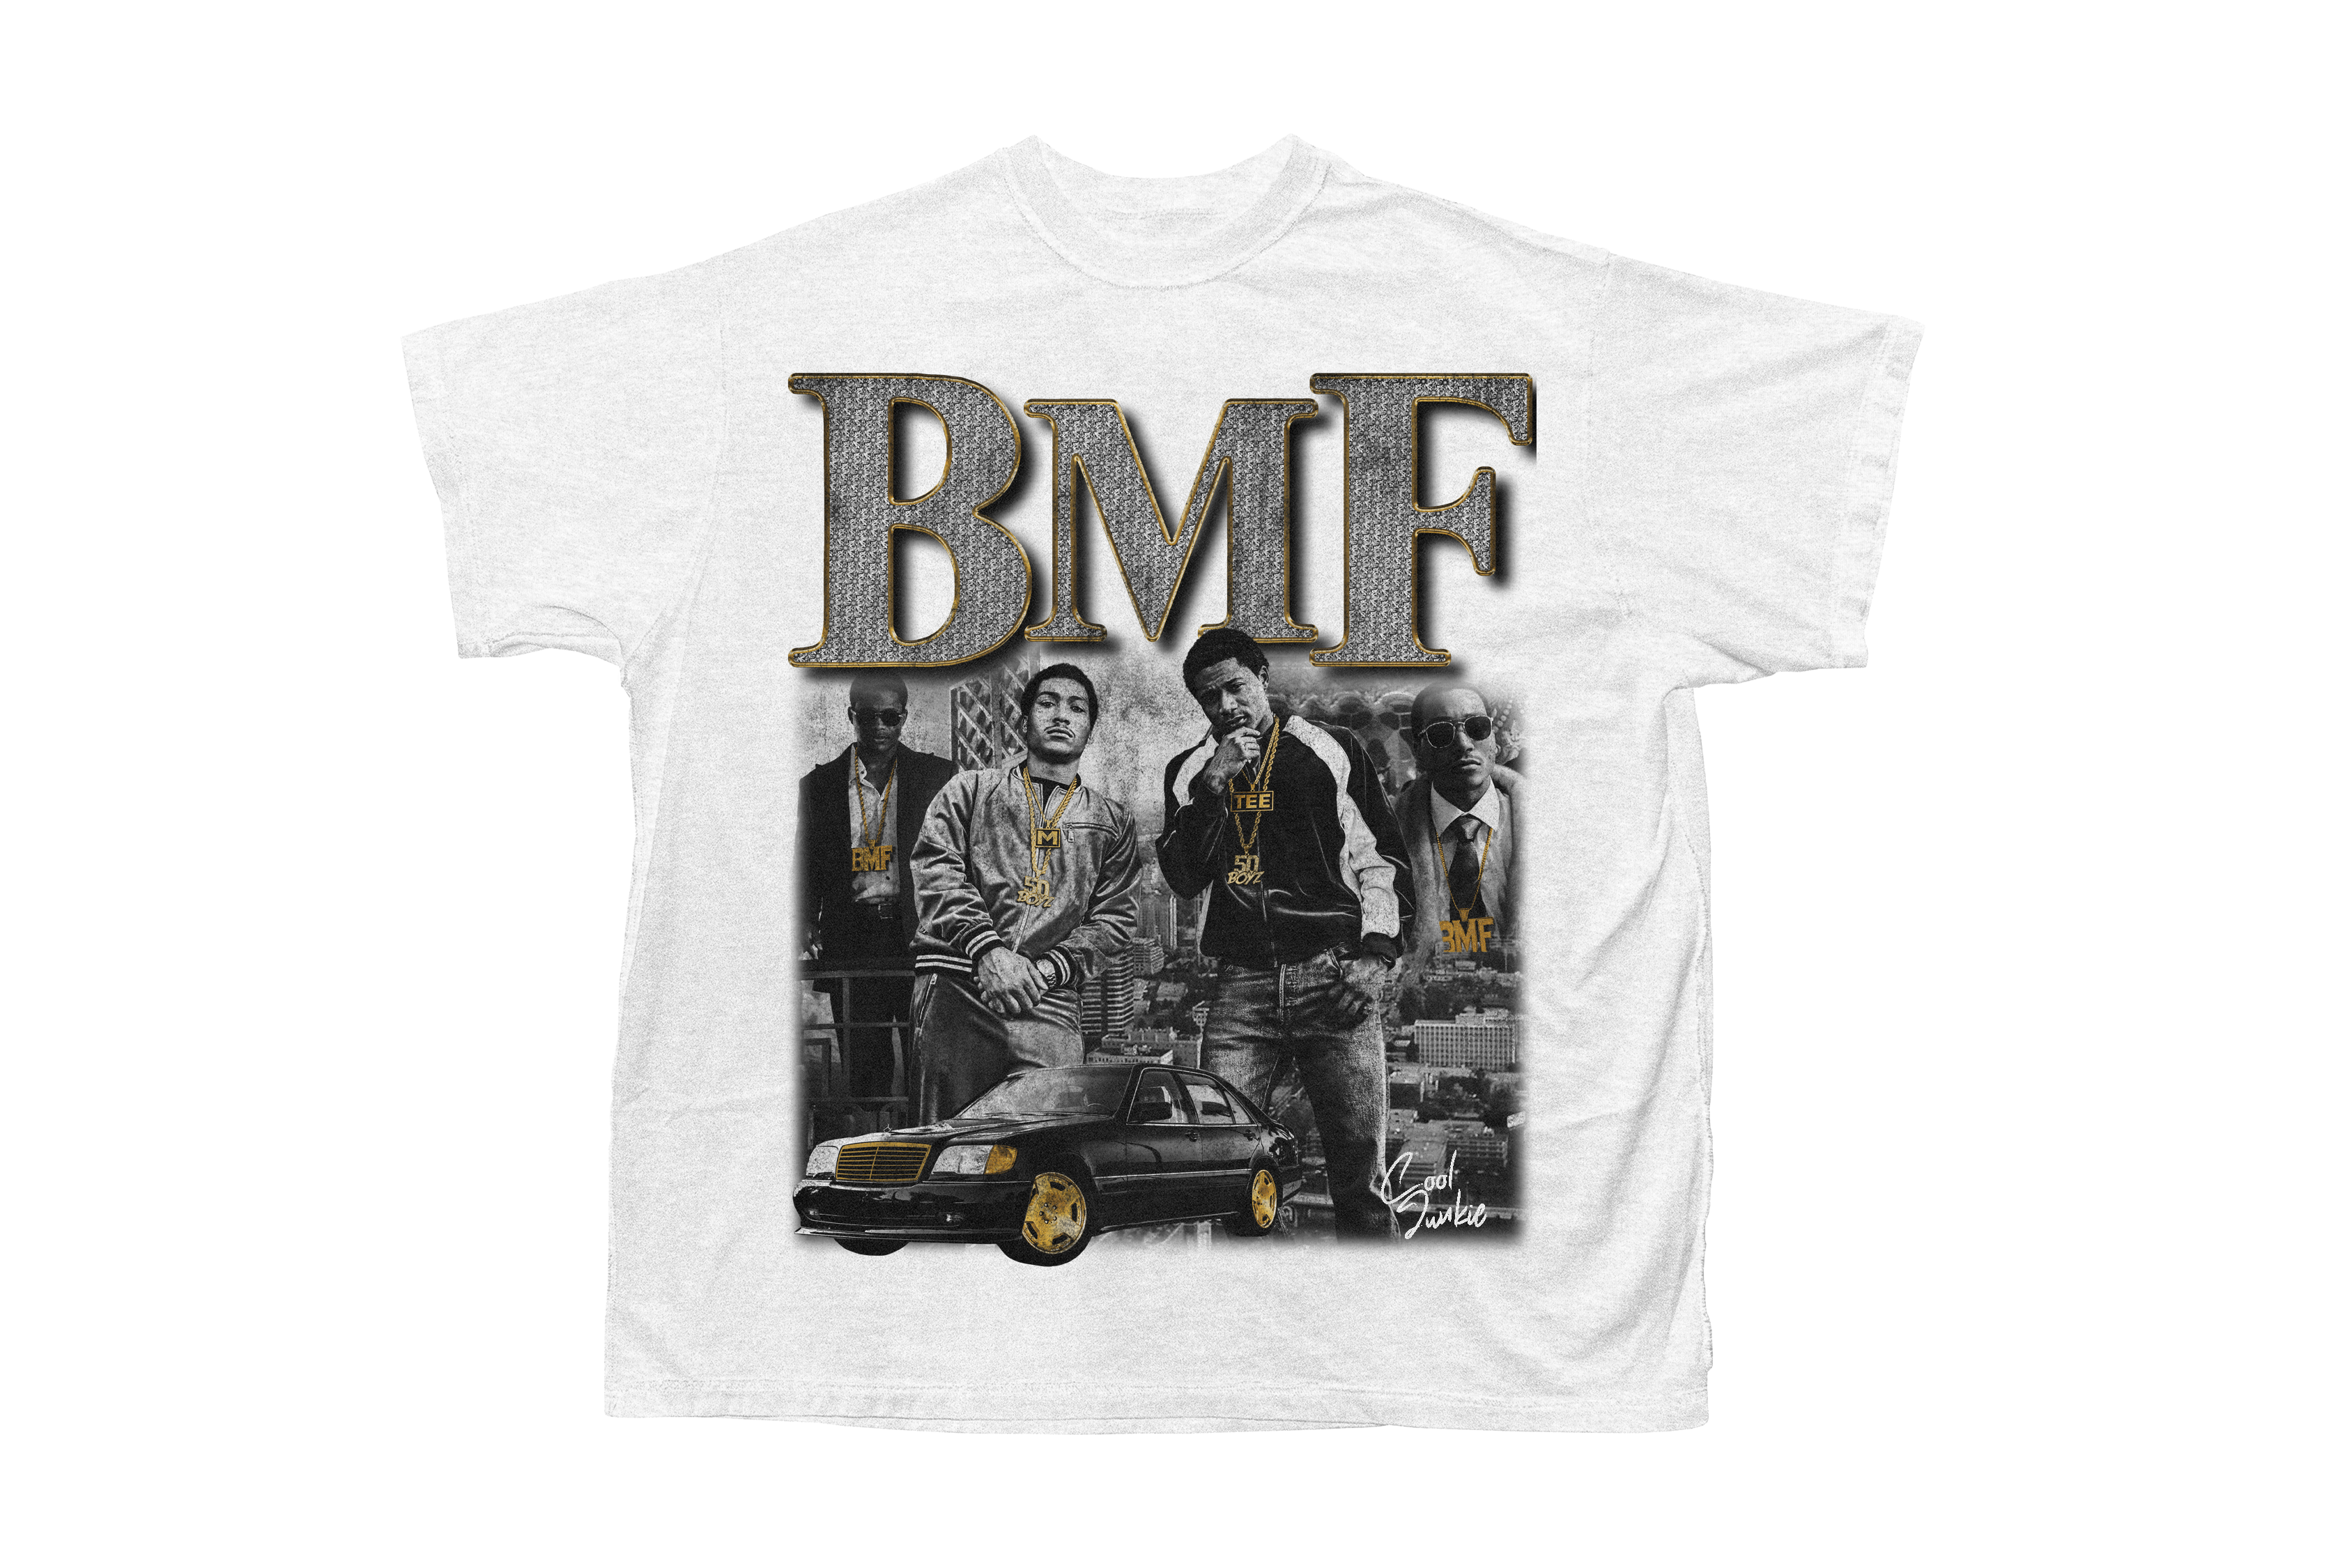 BMF GRAPHIC TEE | Active T-Shirt